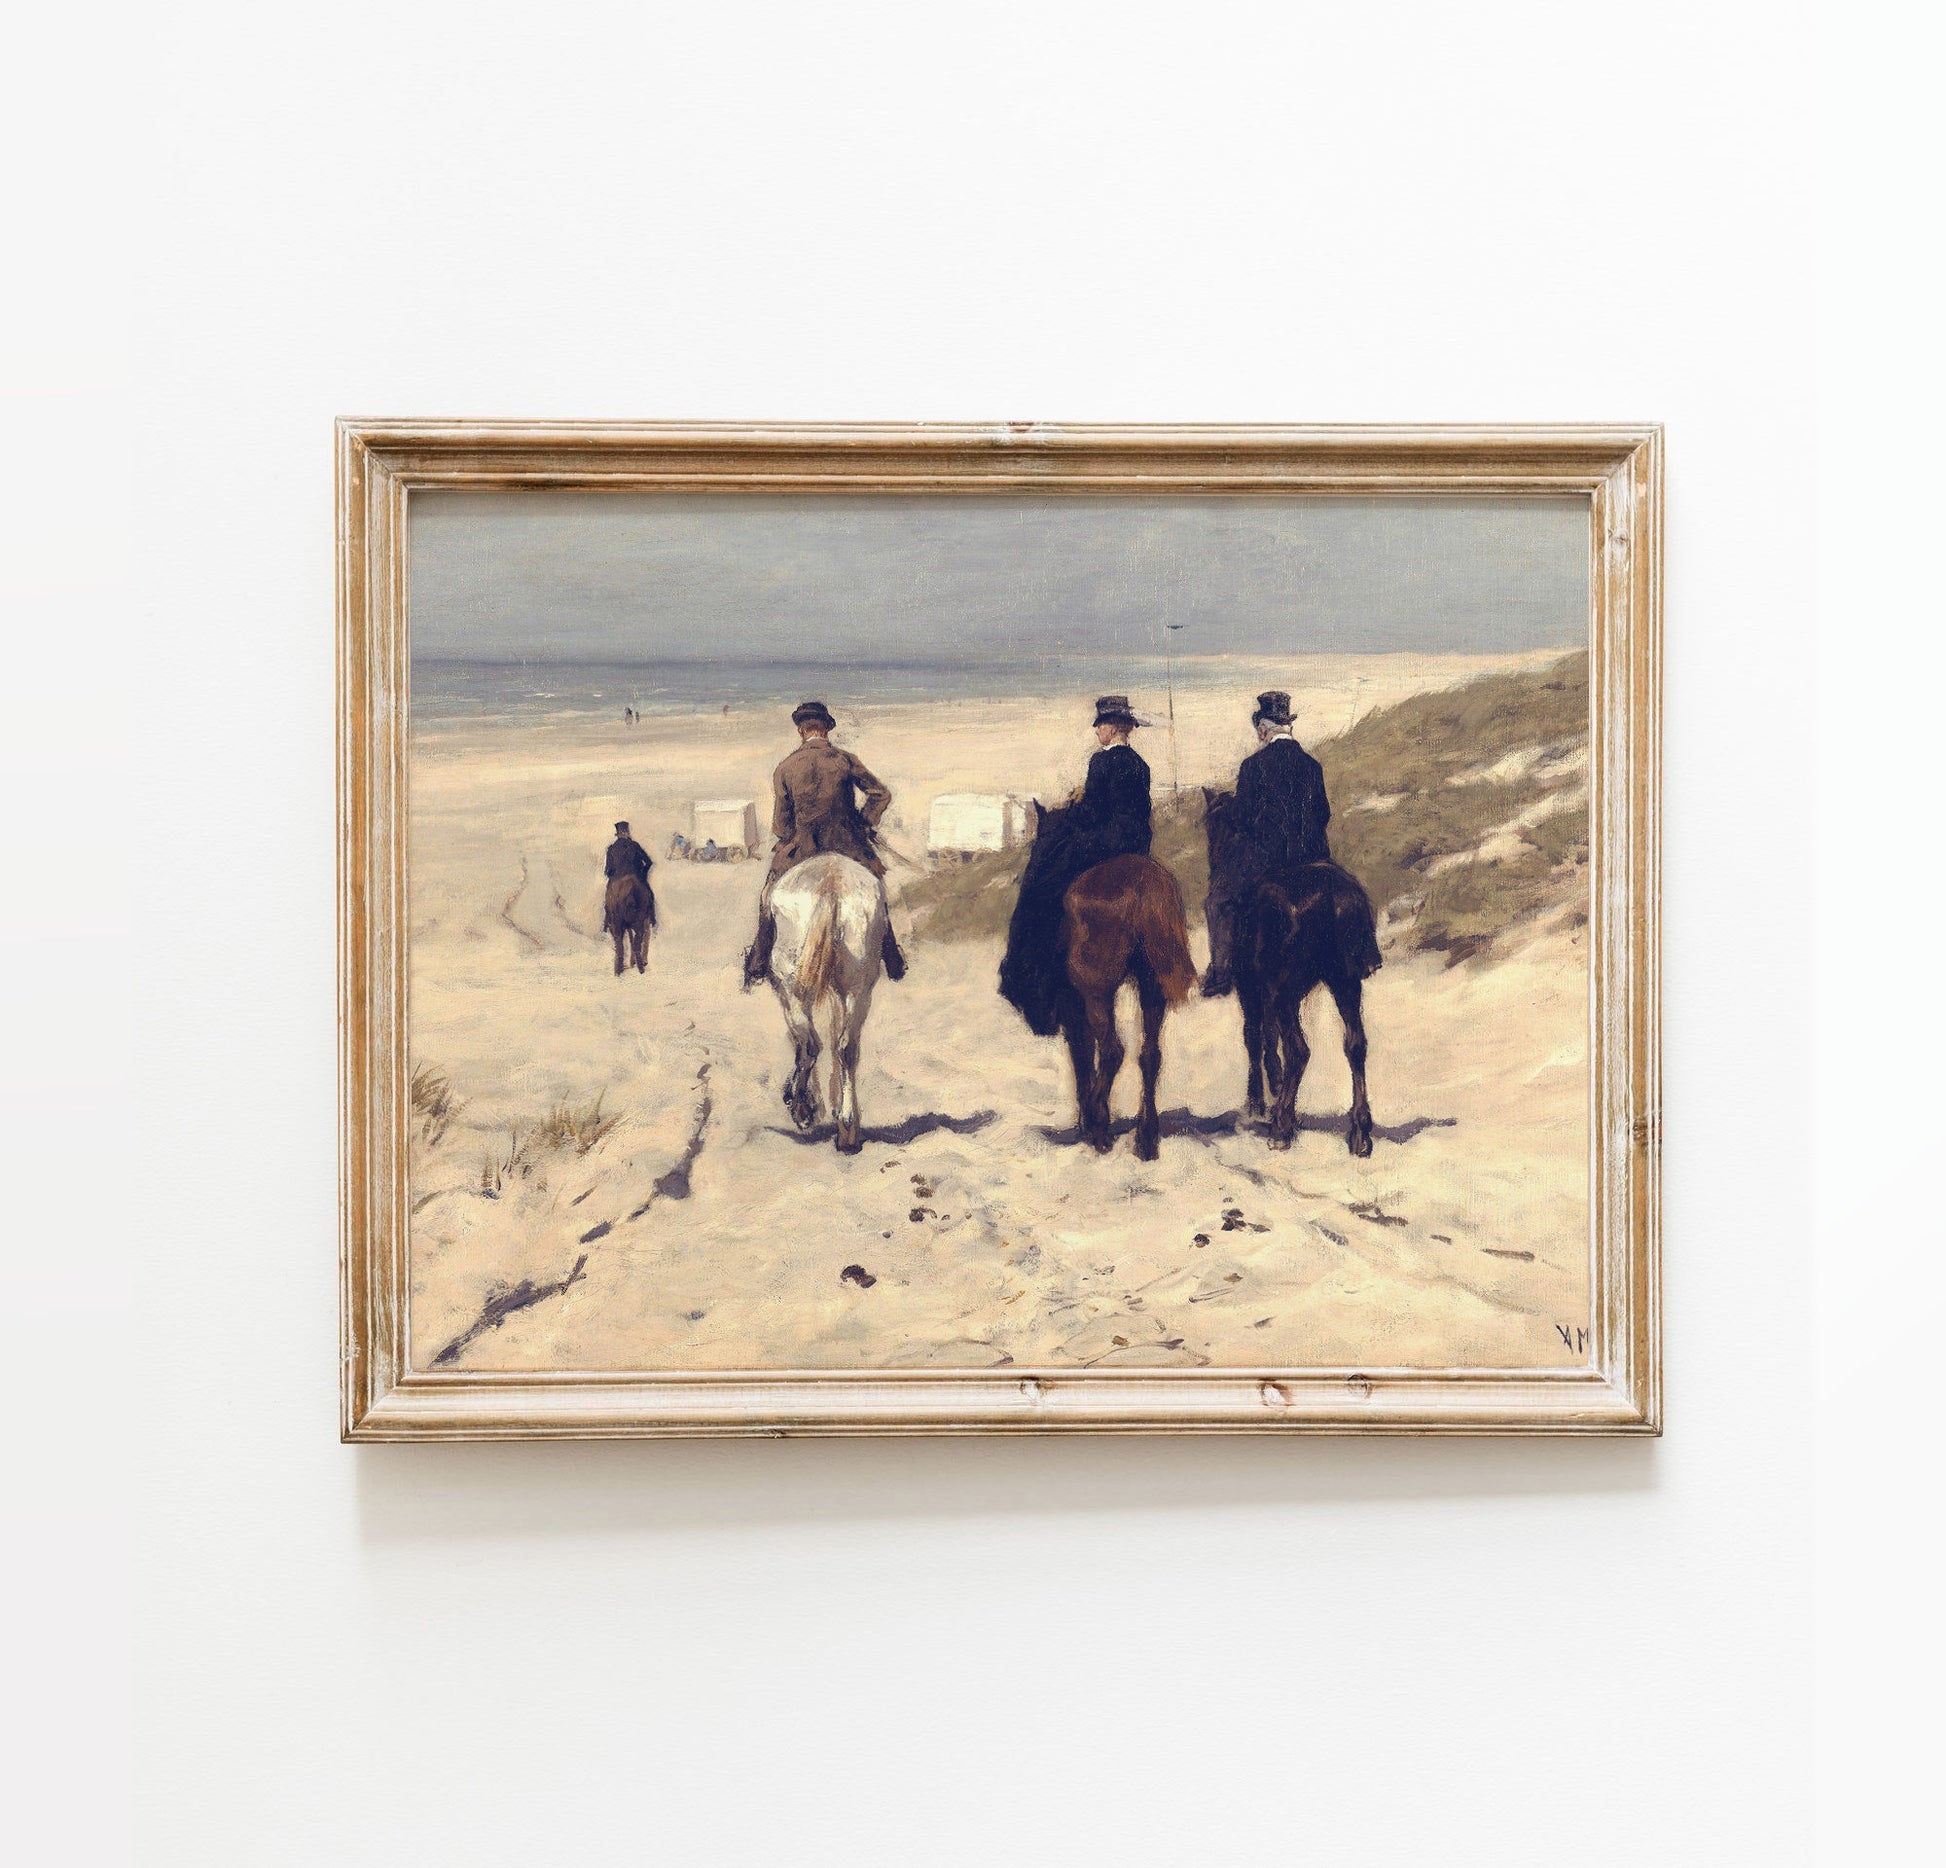 Vintage Horses on Beach Wall Print - Printed and shipped to you on premium paper